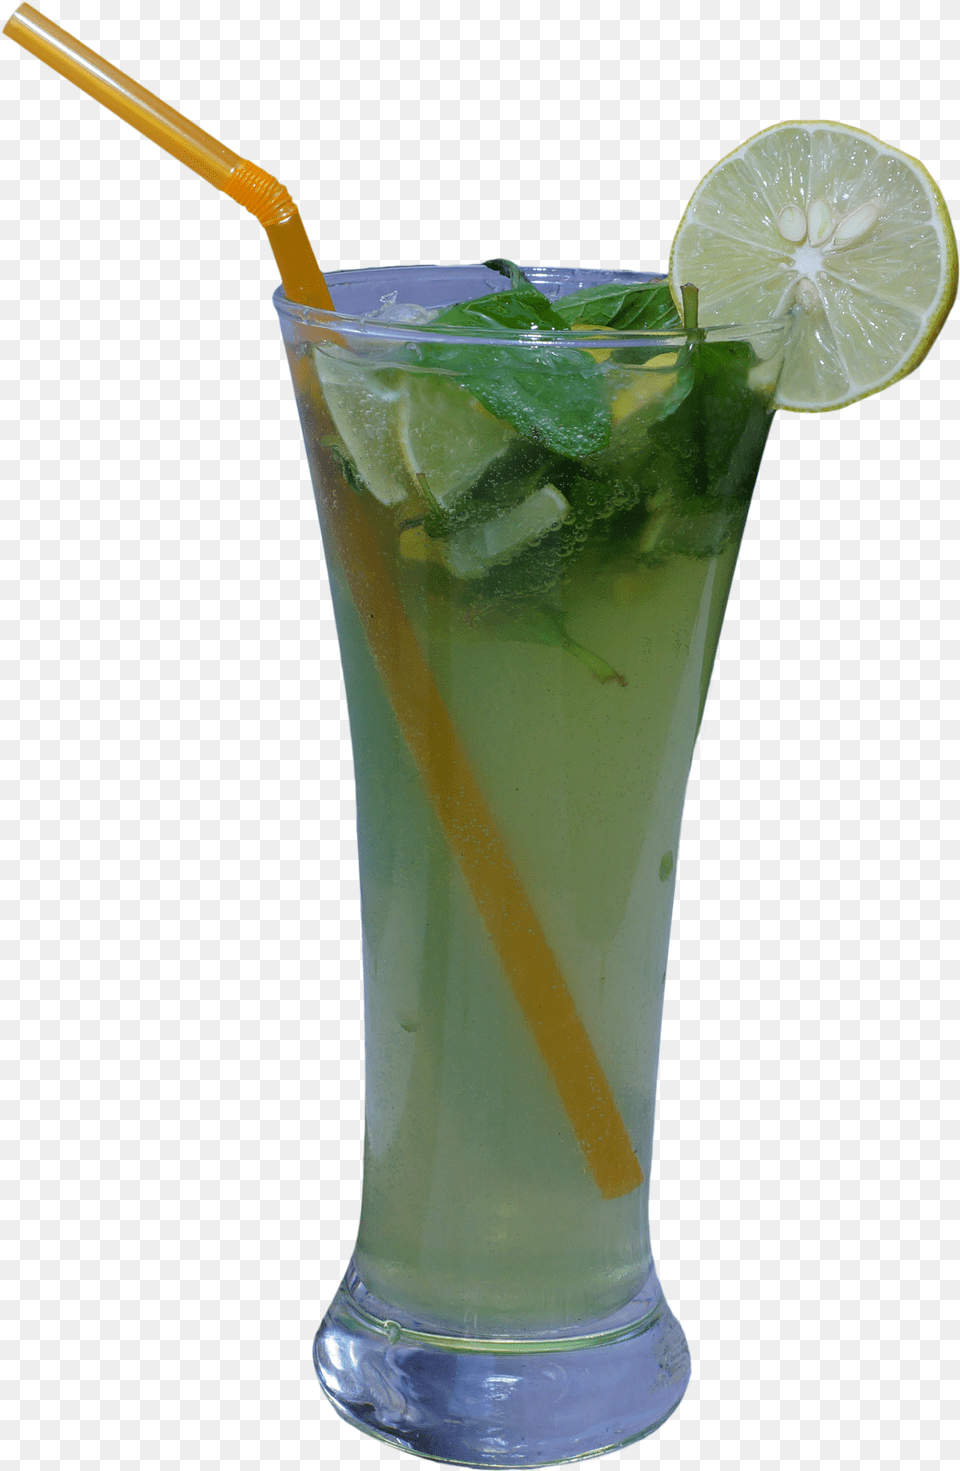 Mint And Lemon Water Glass Lemon Water In Glass, Alcohol, Beverage, Cocktail, Mojito Png